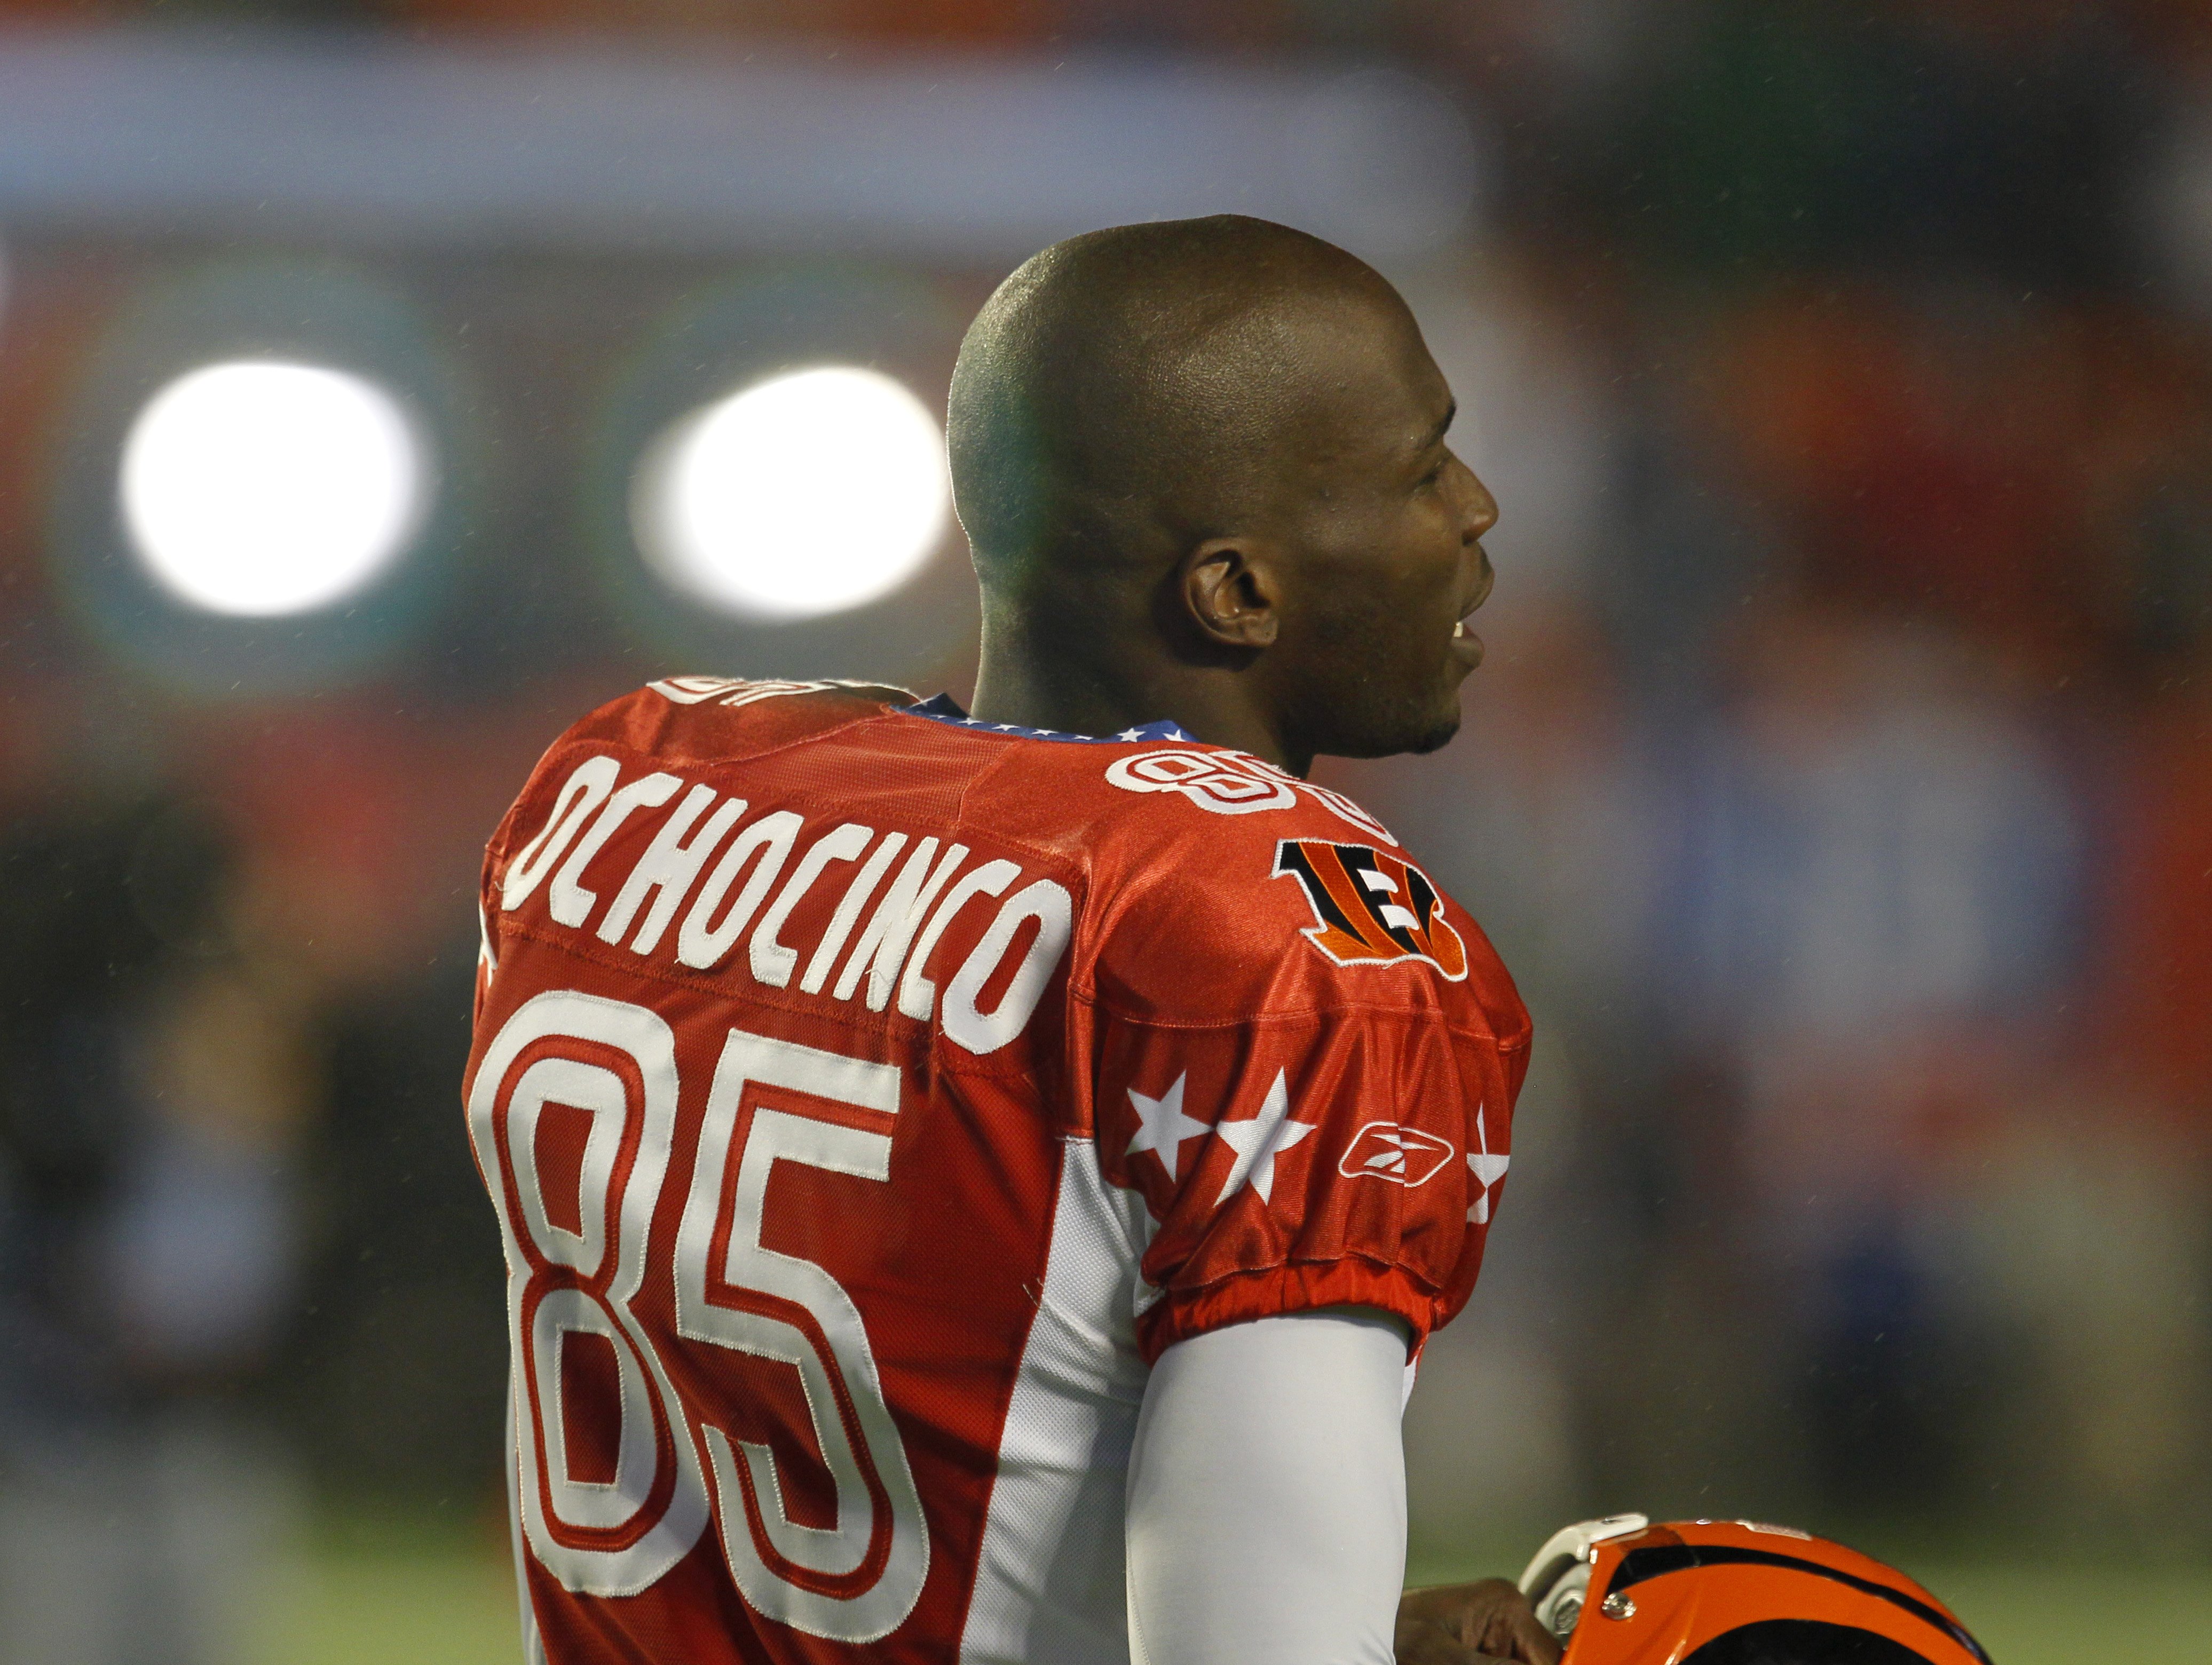 MIAMI GARDENS, FL - JANUARY 31:  Chad Ochocinco #85 of the AFC looks on during the 2010 AFC-NFC Pro Bowl game at Sun Life Stadium on January 31, 2010 in Miami Gardens, Florida. The AFC defeated the NFC 41-34. (Photo by Scott Halleran/Getty Images)